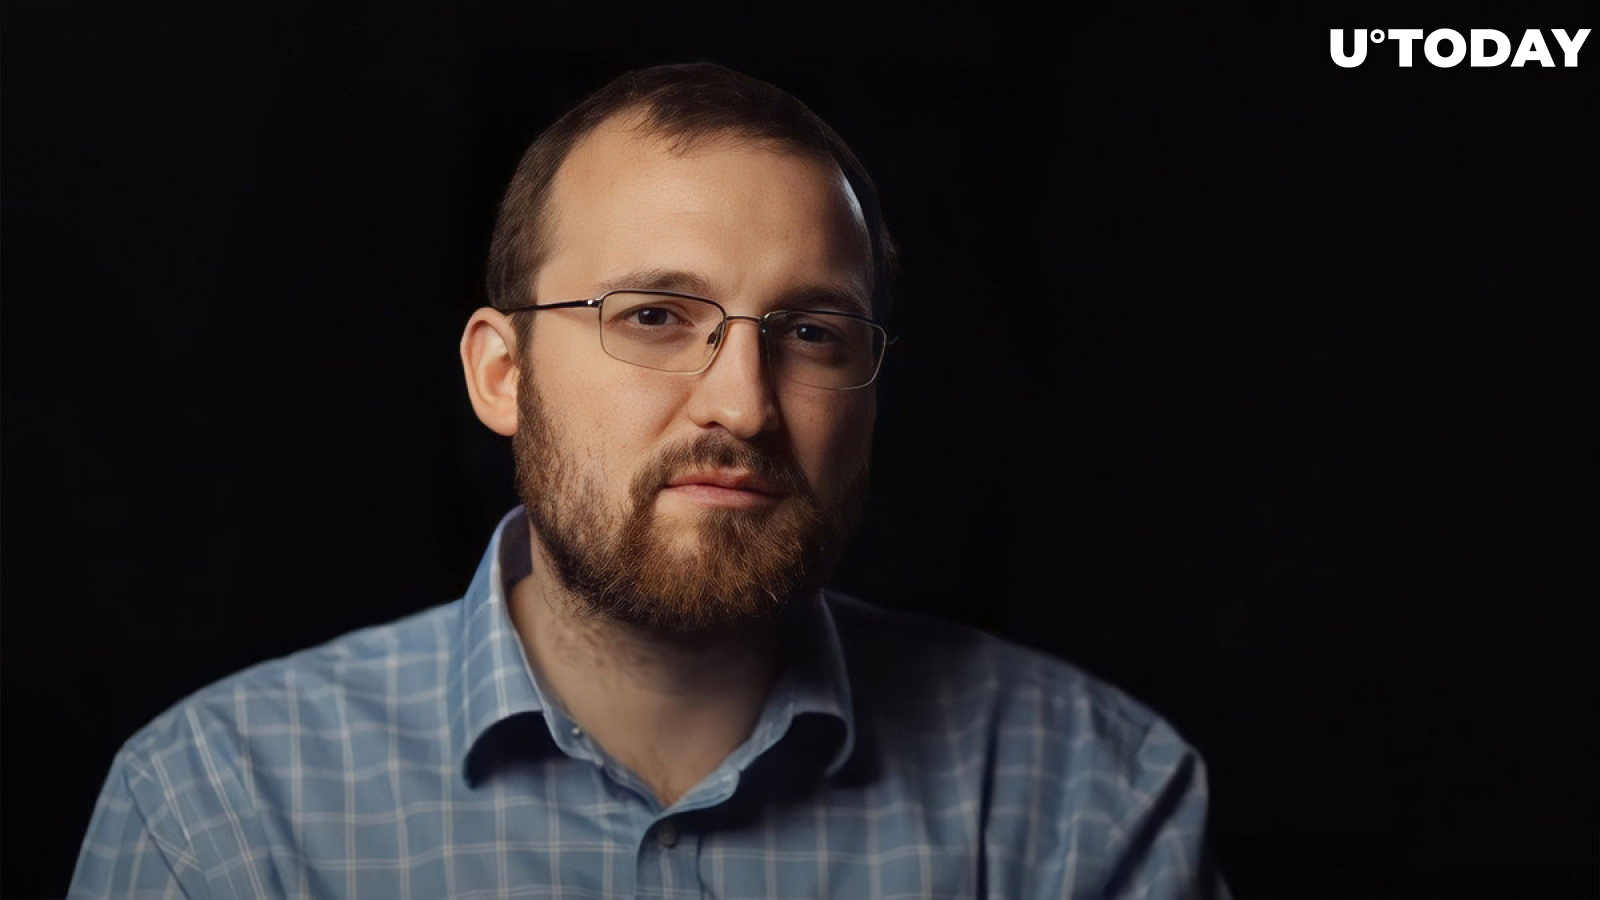 Cardano Founder: Things Moving Quickly, Tons of DApps Coming Online